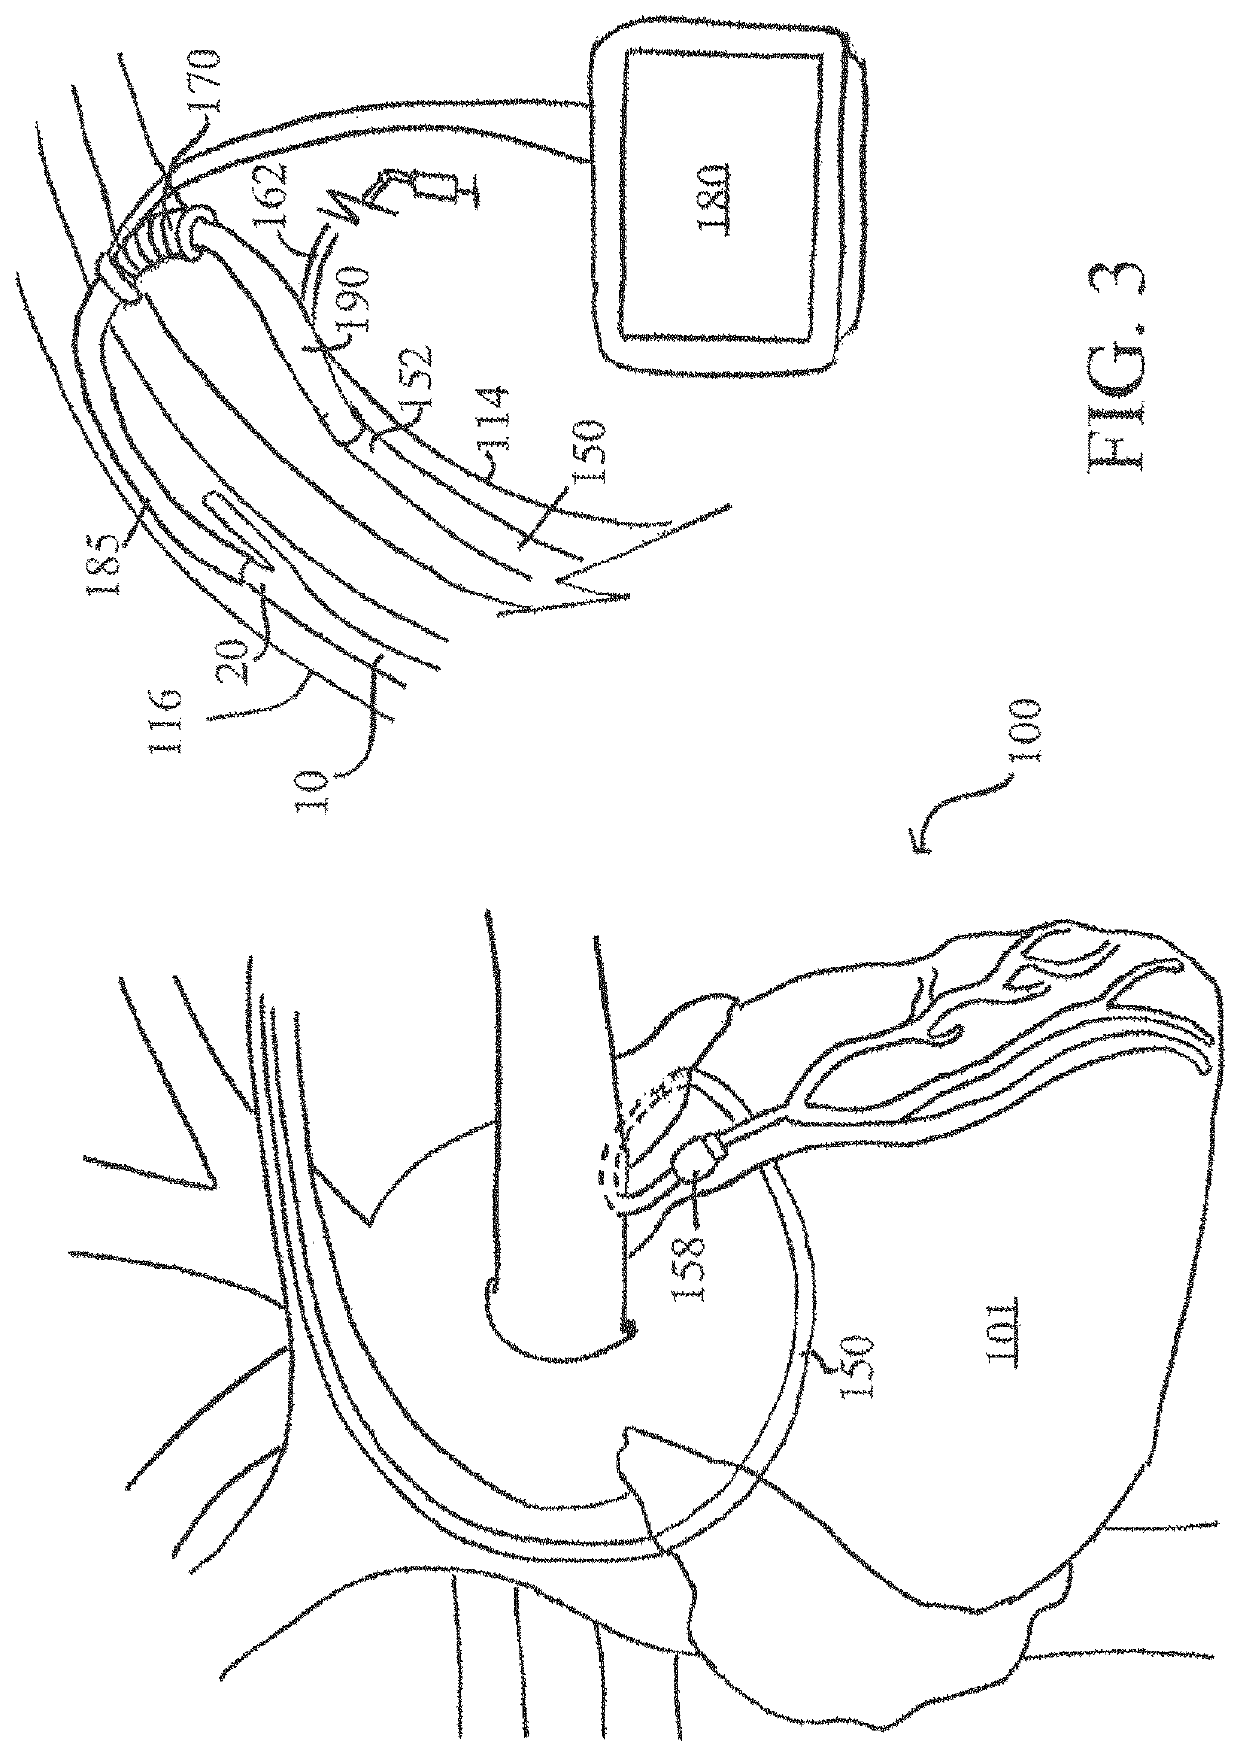 Systems, devices, and methods for organ retroperfusion along with regional mild hypothermia